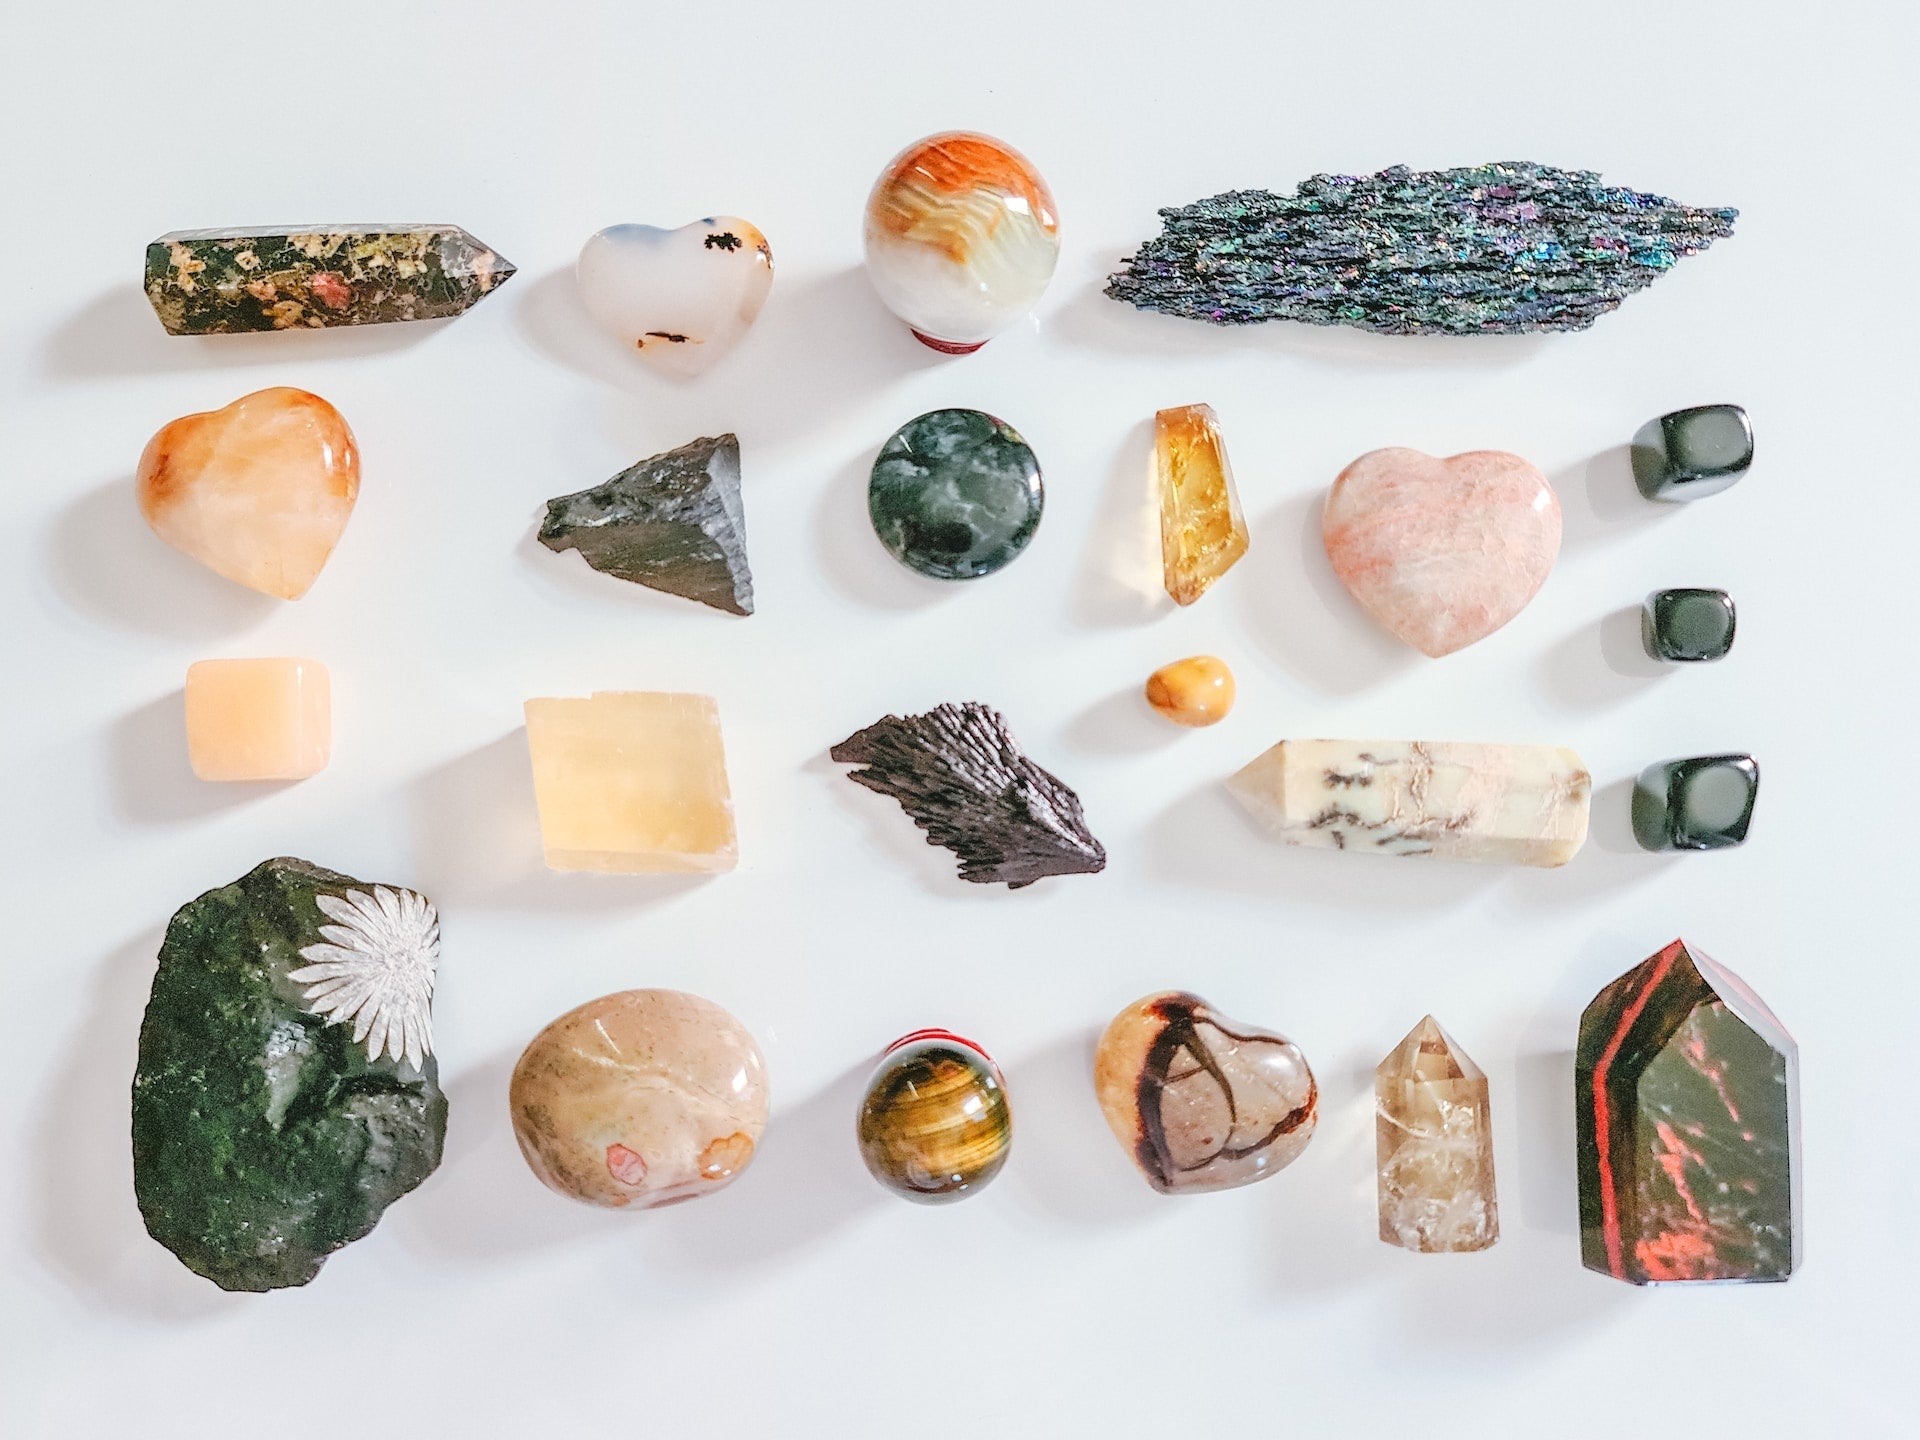 A complete guide to crystals: meanings & how to use - MØDA